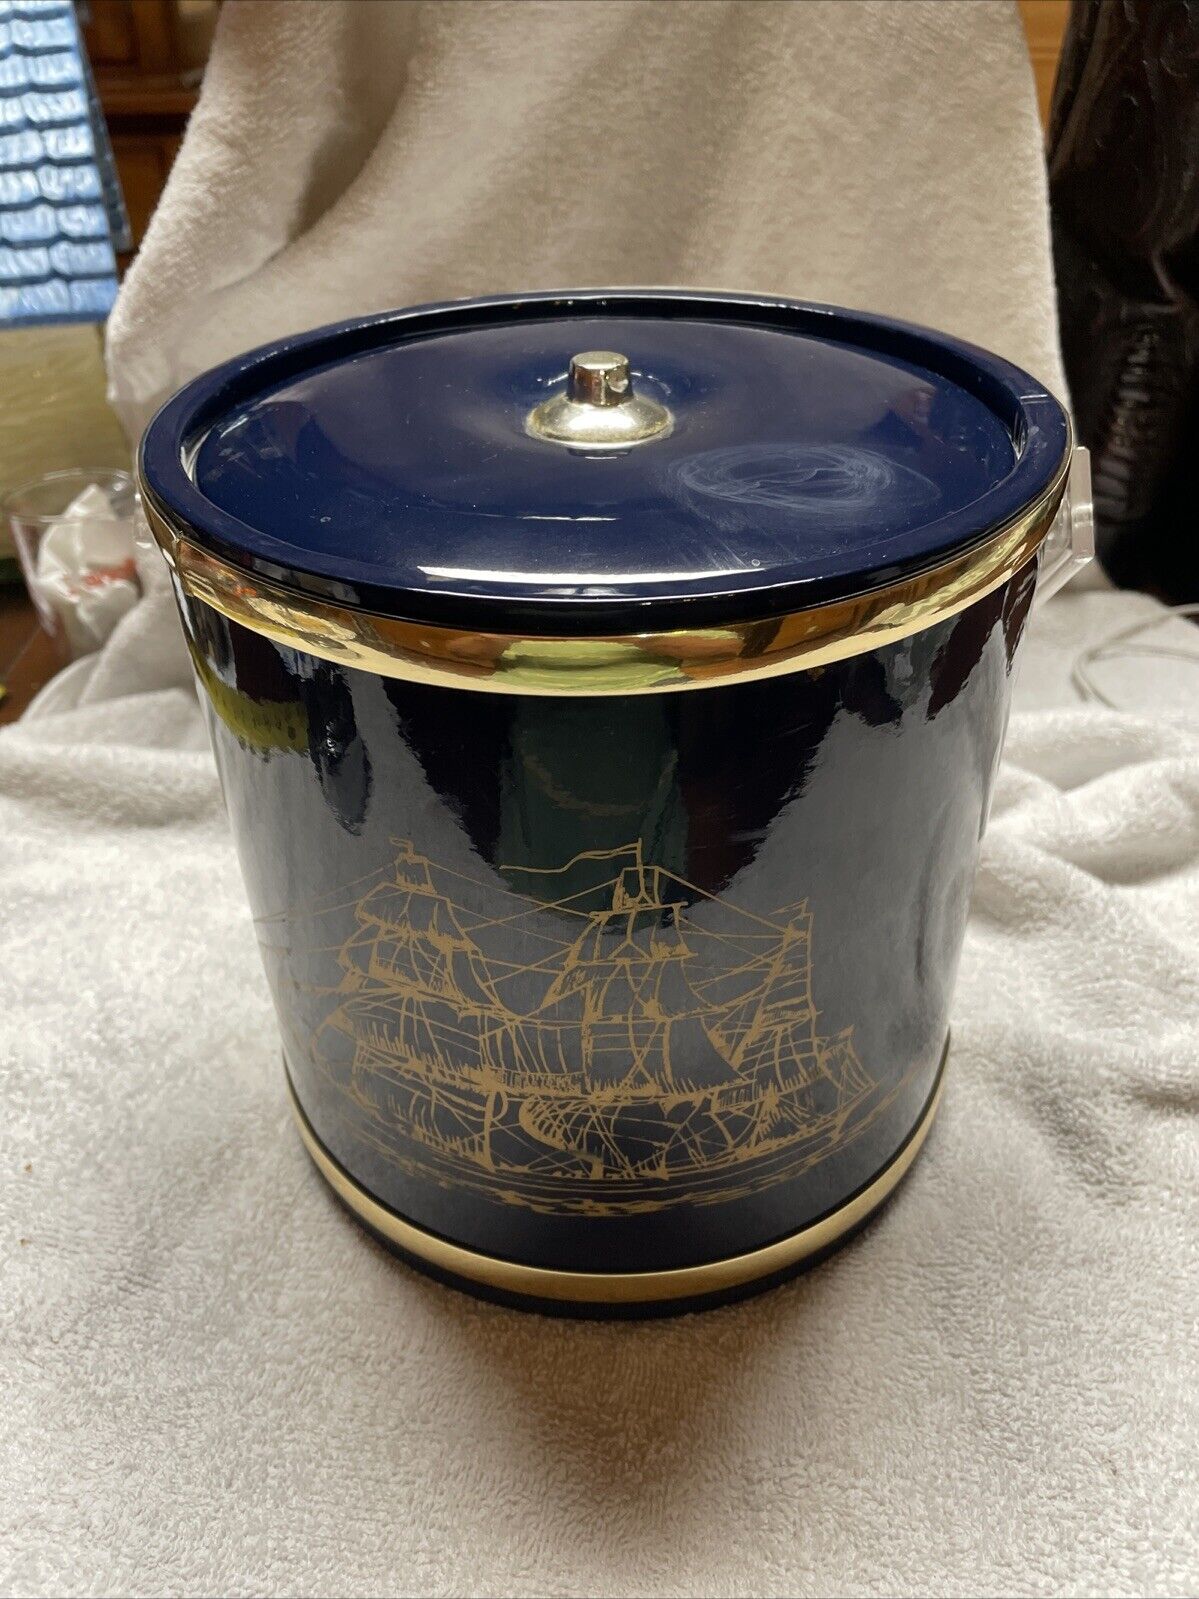 Vintage Shelton Ware Ice Bucket Blue with Gold Accents Gold Schooner Ship Front